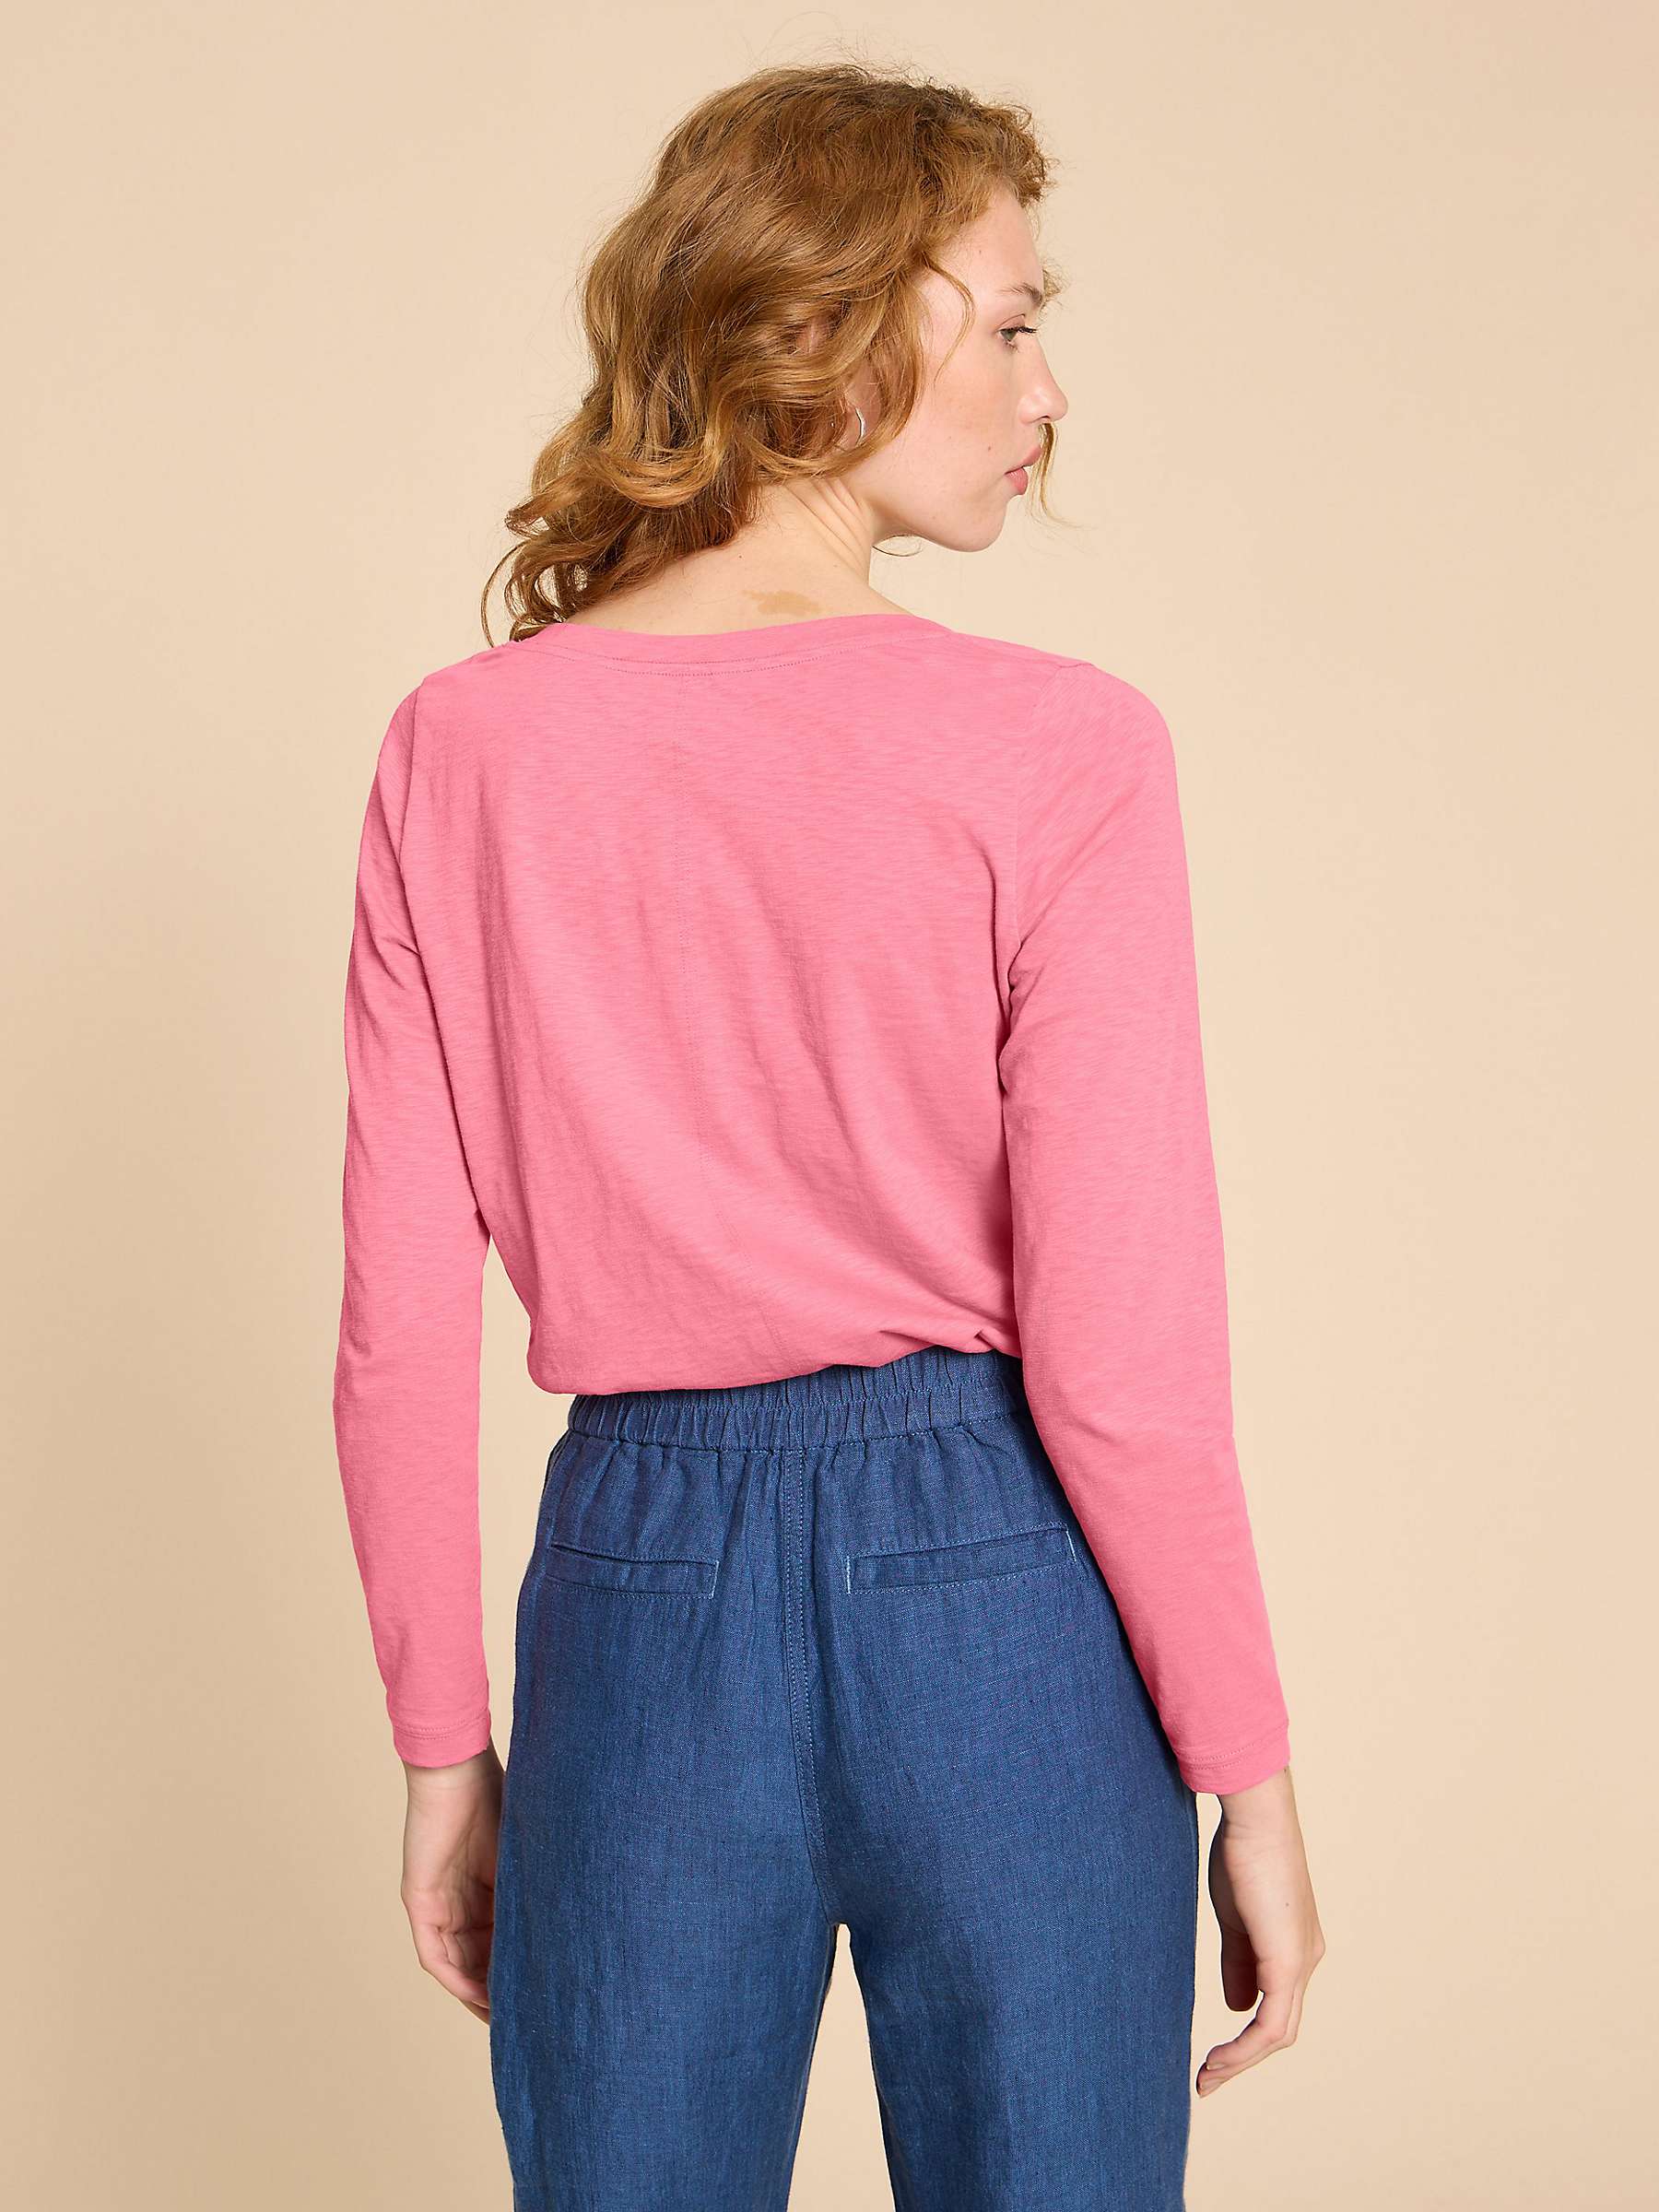 Buy White Stuff Nelly Cotton Long Sleeve Top Online at johnlewis.com